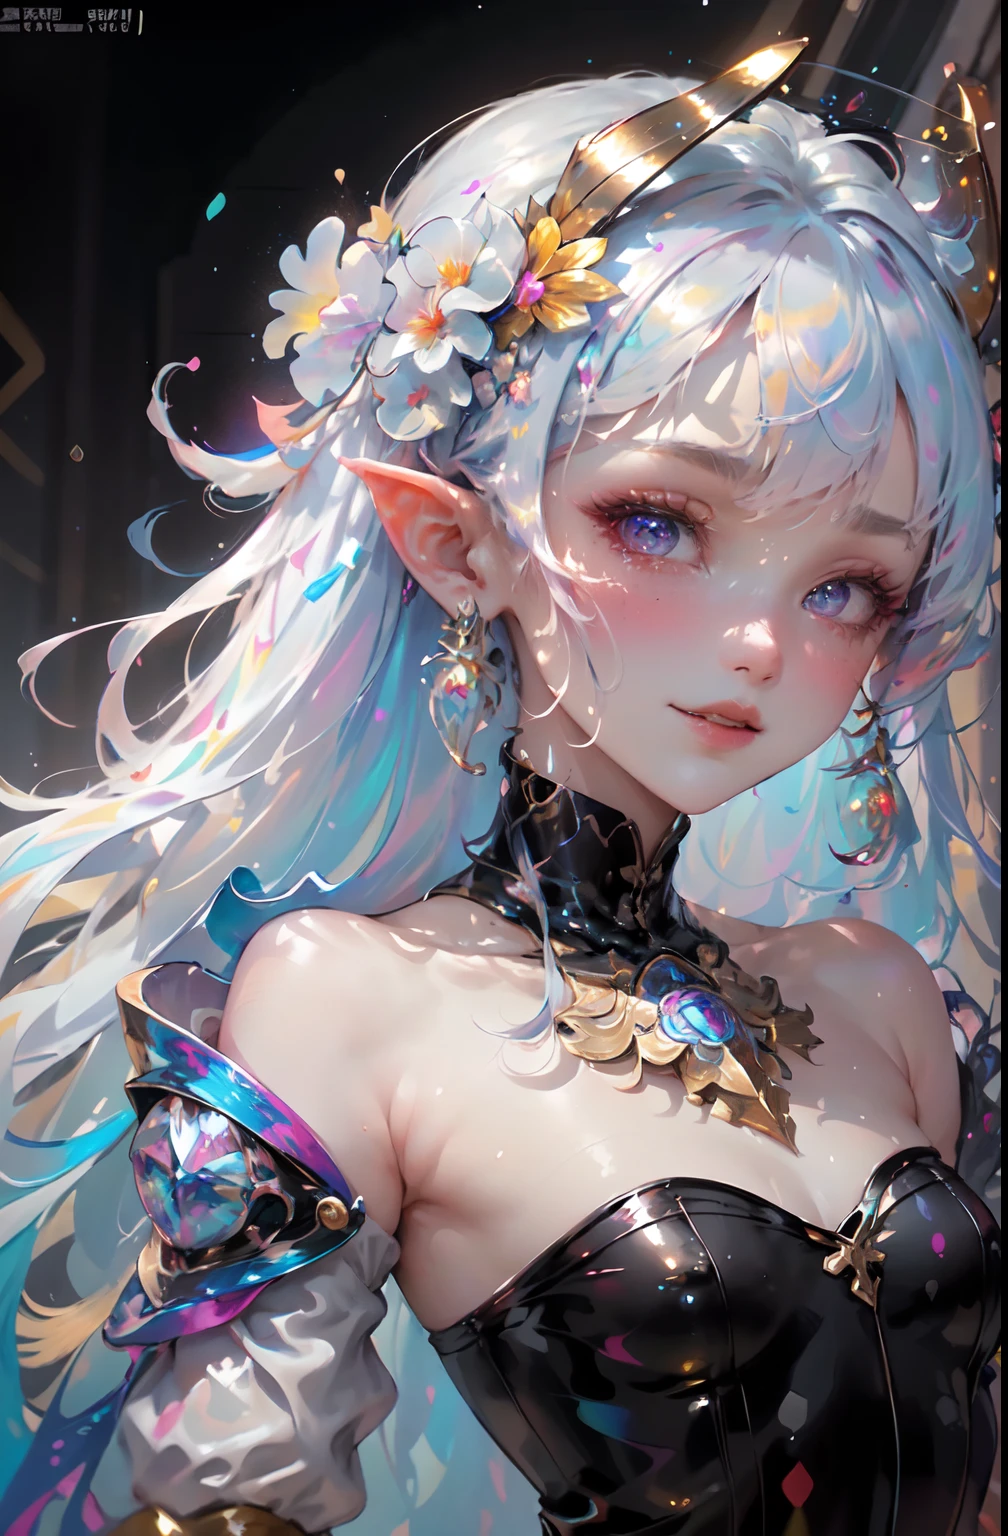 （Pink fashion mech：1.9），（Colorful hair：1.8），（Rainbow all colors：1.8），（（（（Vertical painting：1.6)）），（painting of a：1.6），frontage，comic strip,illustration,painting of a,largeeyes,crystal-clear,（rainbow color gradient high ponytail：1.7）,Delicatemakeup,Keep one's mouth shut,(Small Fresh:1.5),(Bandeau:1.6),long eyelasher,White shoulder T- shirt, White Shoulder Shirt，looking at viewert，watery big eyes，(rainbow colour hair：1.6), color splash, （solo：1.8）, color splash, color explosion, colour splash, color explosion, Thick lacquer style，Messy lines，((shining)) ，(colorful), (colorful), (colorful), colorful, Thick Paint Style, (Splash) (Color Splash), Vertical Painting, Upper Body, Paint Splash, Acrylic Pigment, Gradient, Paint, Highest Image Quality, Highest image quality, Masterpiece, Solo, Depth of Field, Face Paint, colorful clothes, (ellegance: 1.2), opulent, long whitr hair, ventania, (ellegance: 1.3), (petals: 1.4)，(((masterpiece))),(((Best quality at best))),((ultra - detailed)),(illustratio),(dynamic angle),((floatking)),(Paintwork),((Loose hair)),(solo),(1girl) , (( (Detailed anima face))),